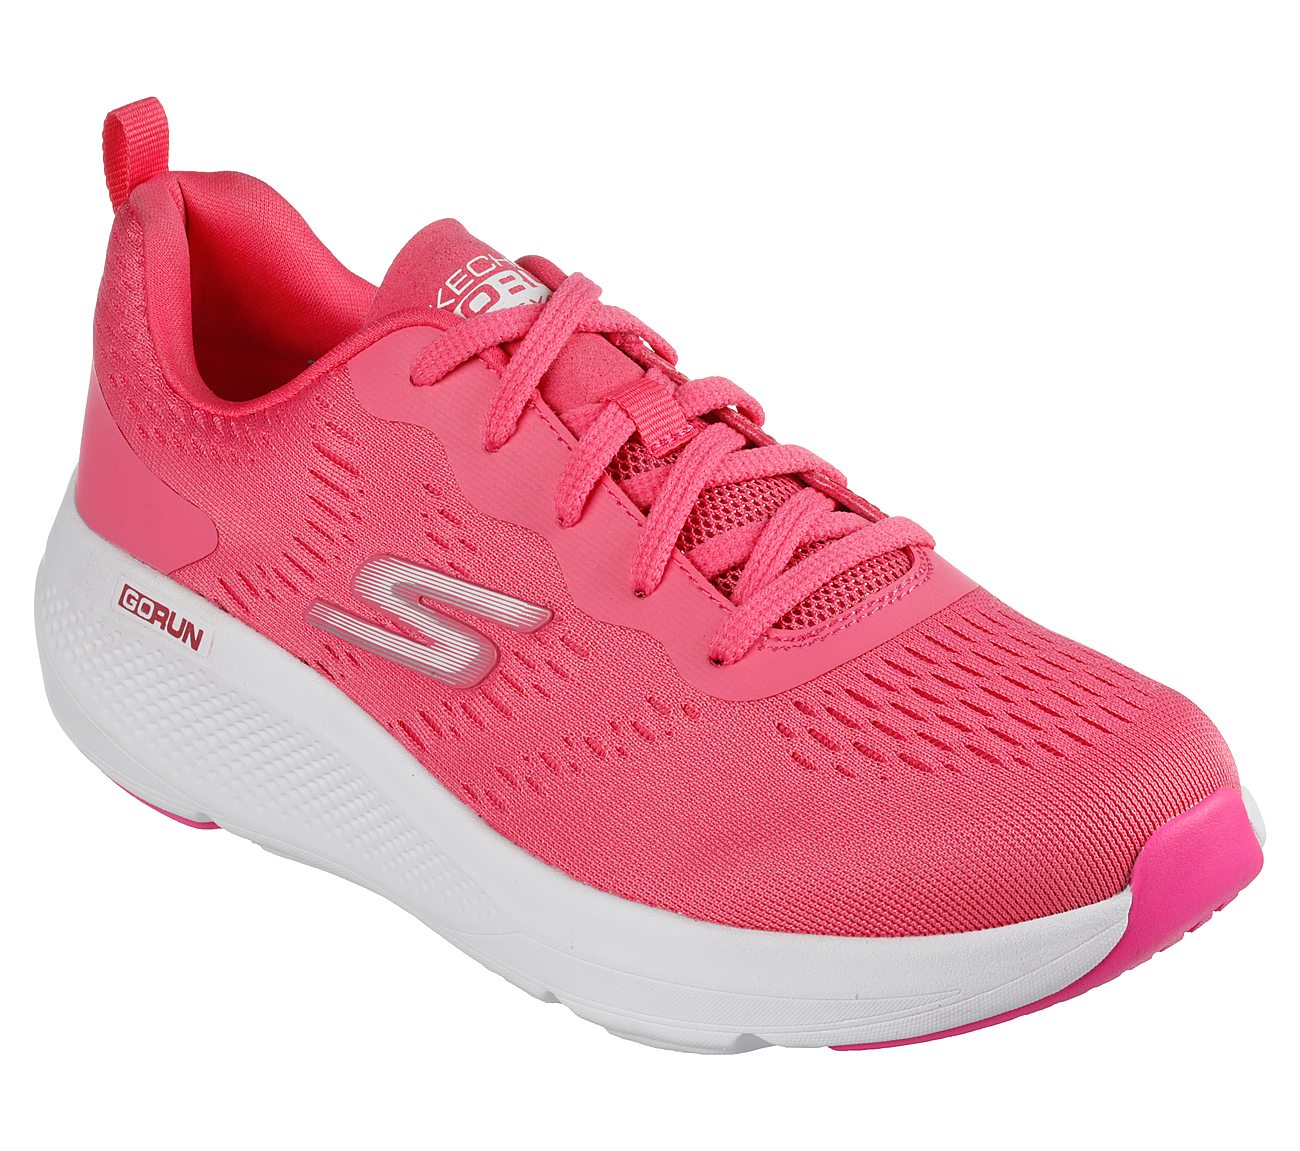 GO RUN ELEVATE, PPINK Footwear Lateral View